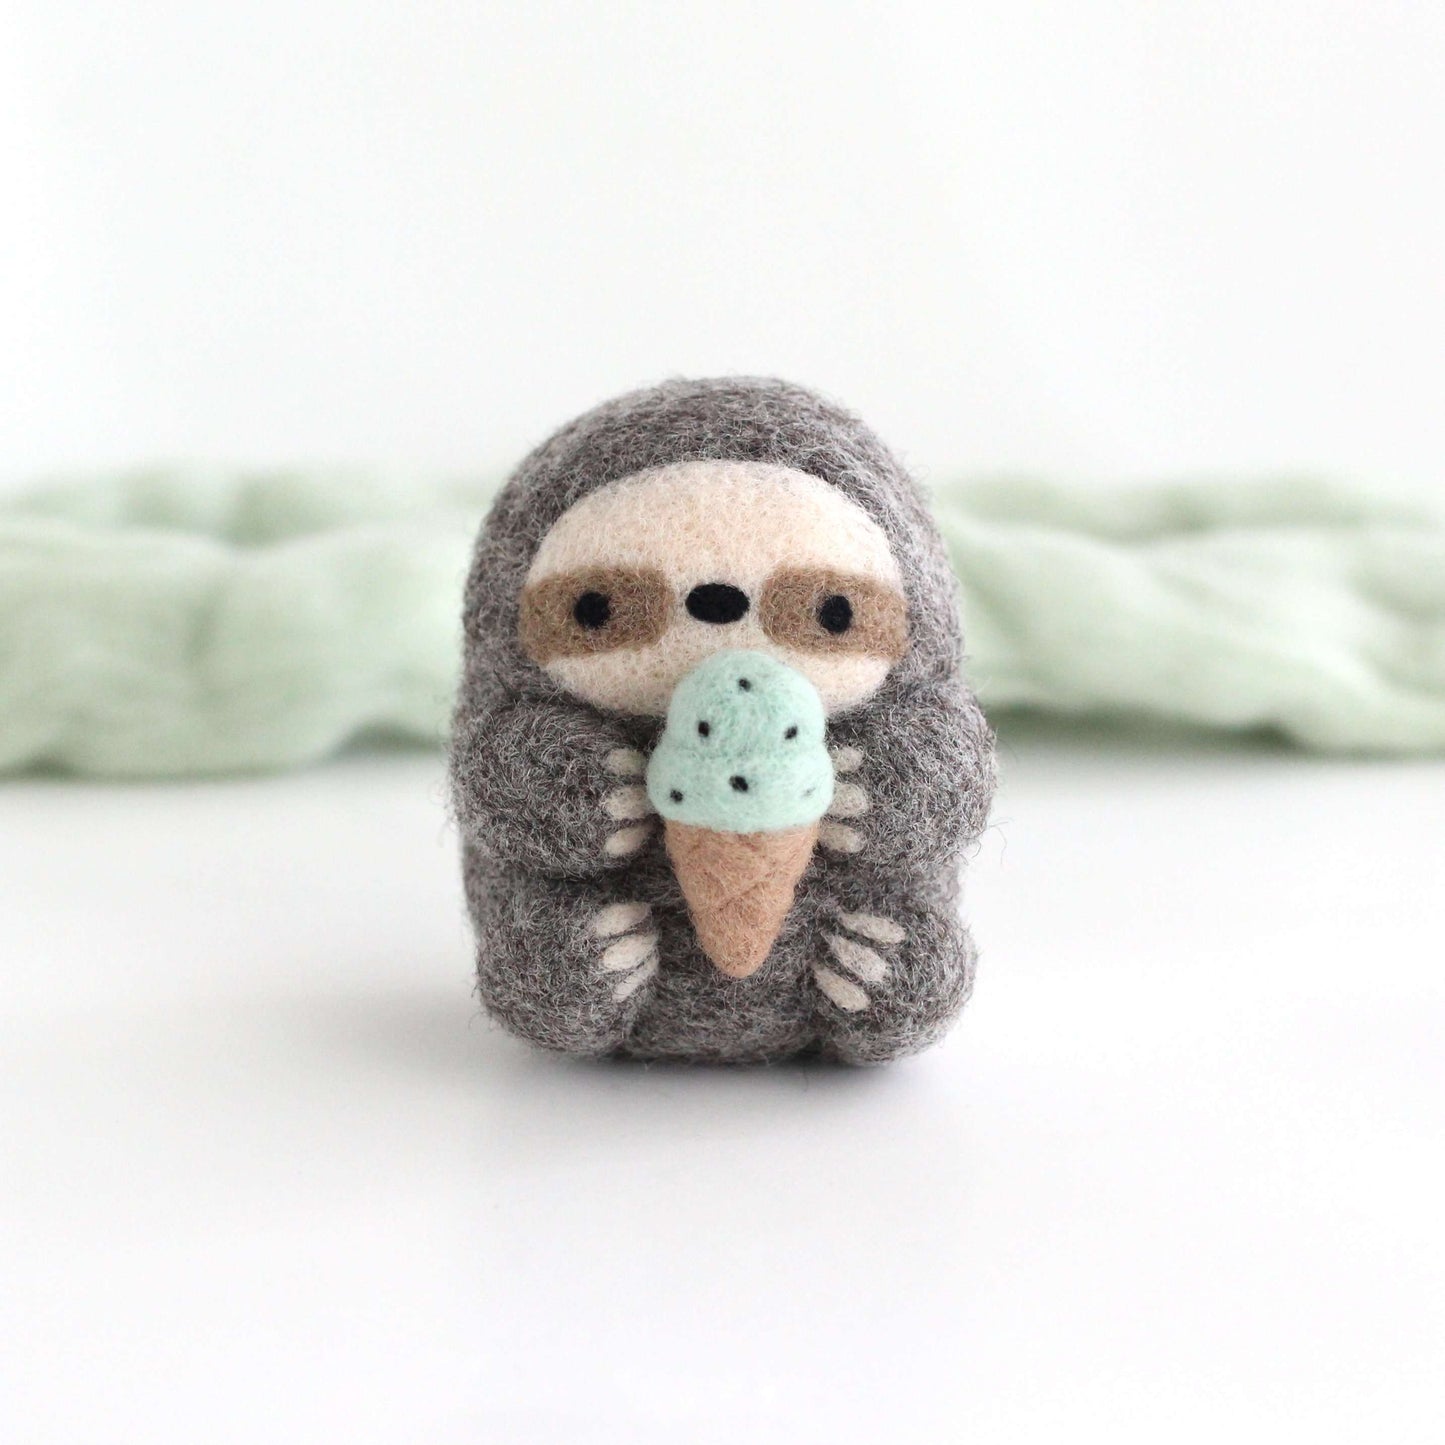 Custom Needle Felted Sloth (Made-to-Order) - Tier 1 by Wild Whimsy Woolies